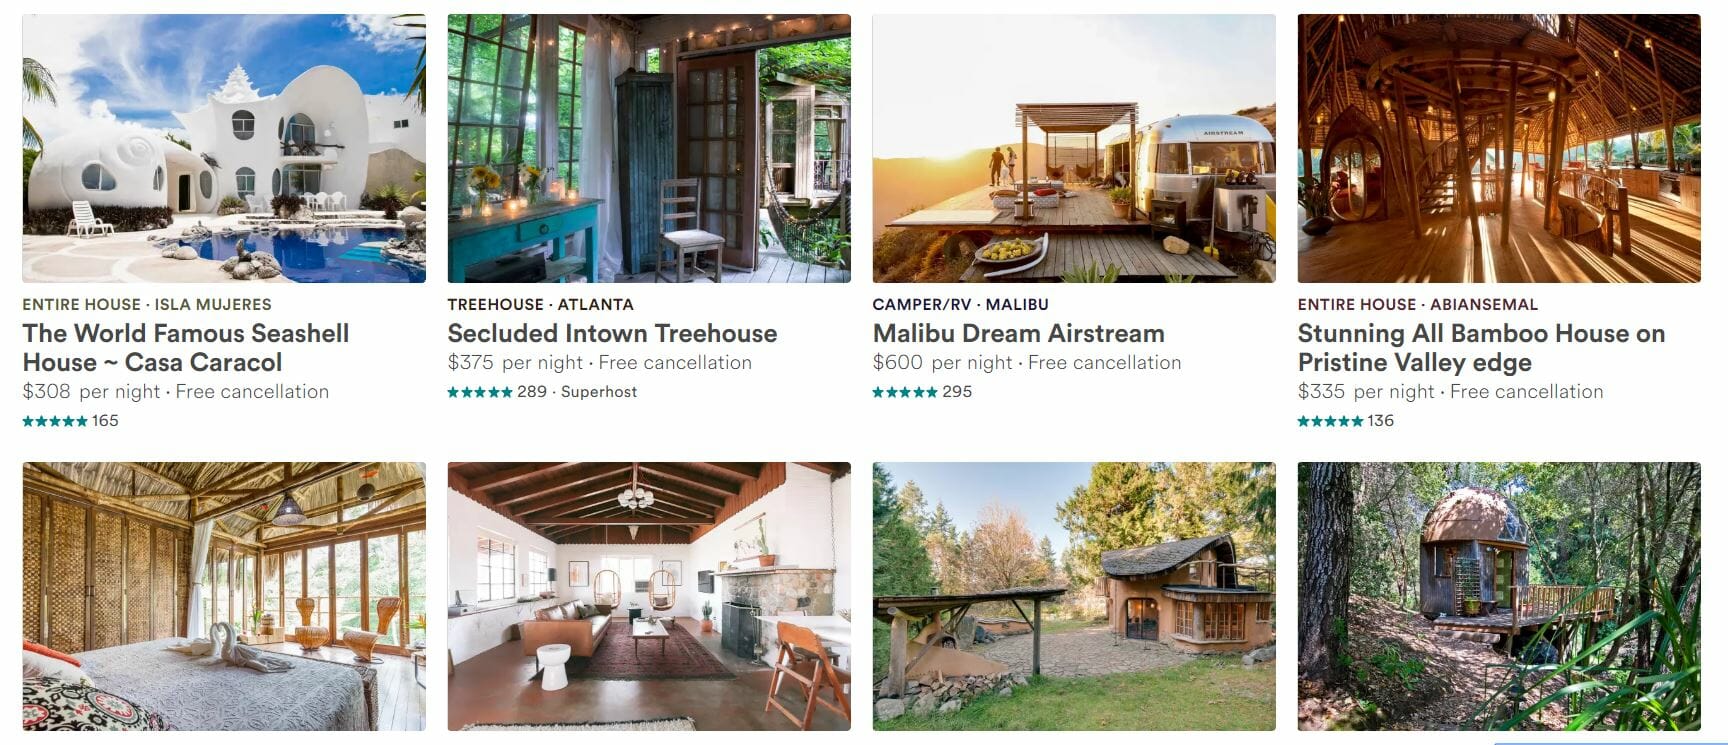 Is Airbnb Actually The Best Choice The Pros And Cons Of Airbnb